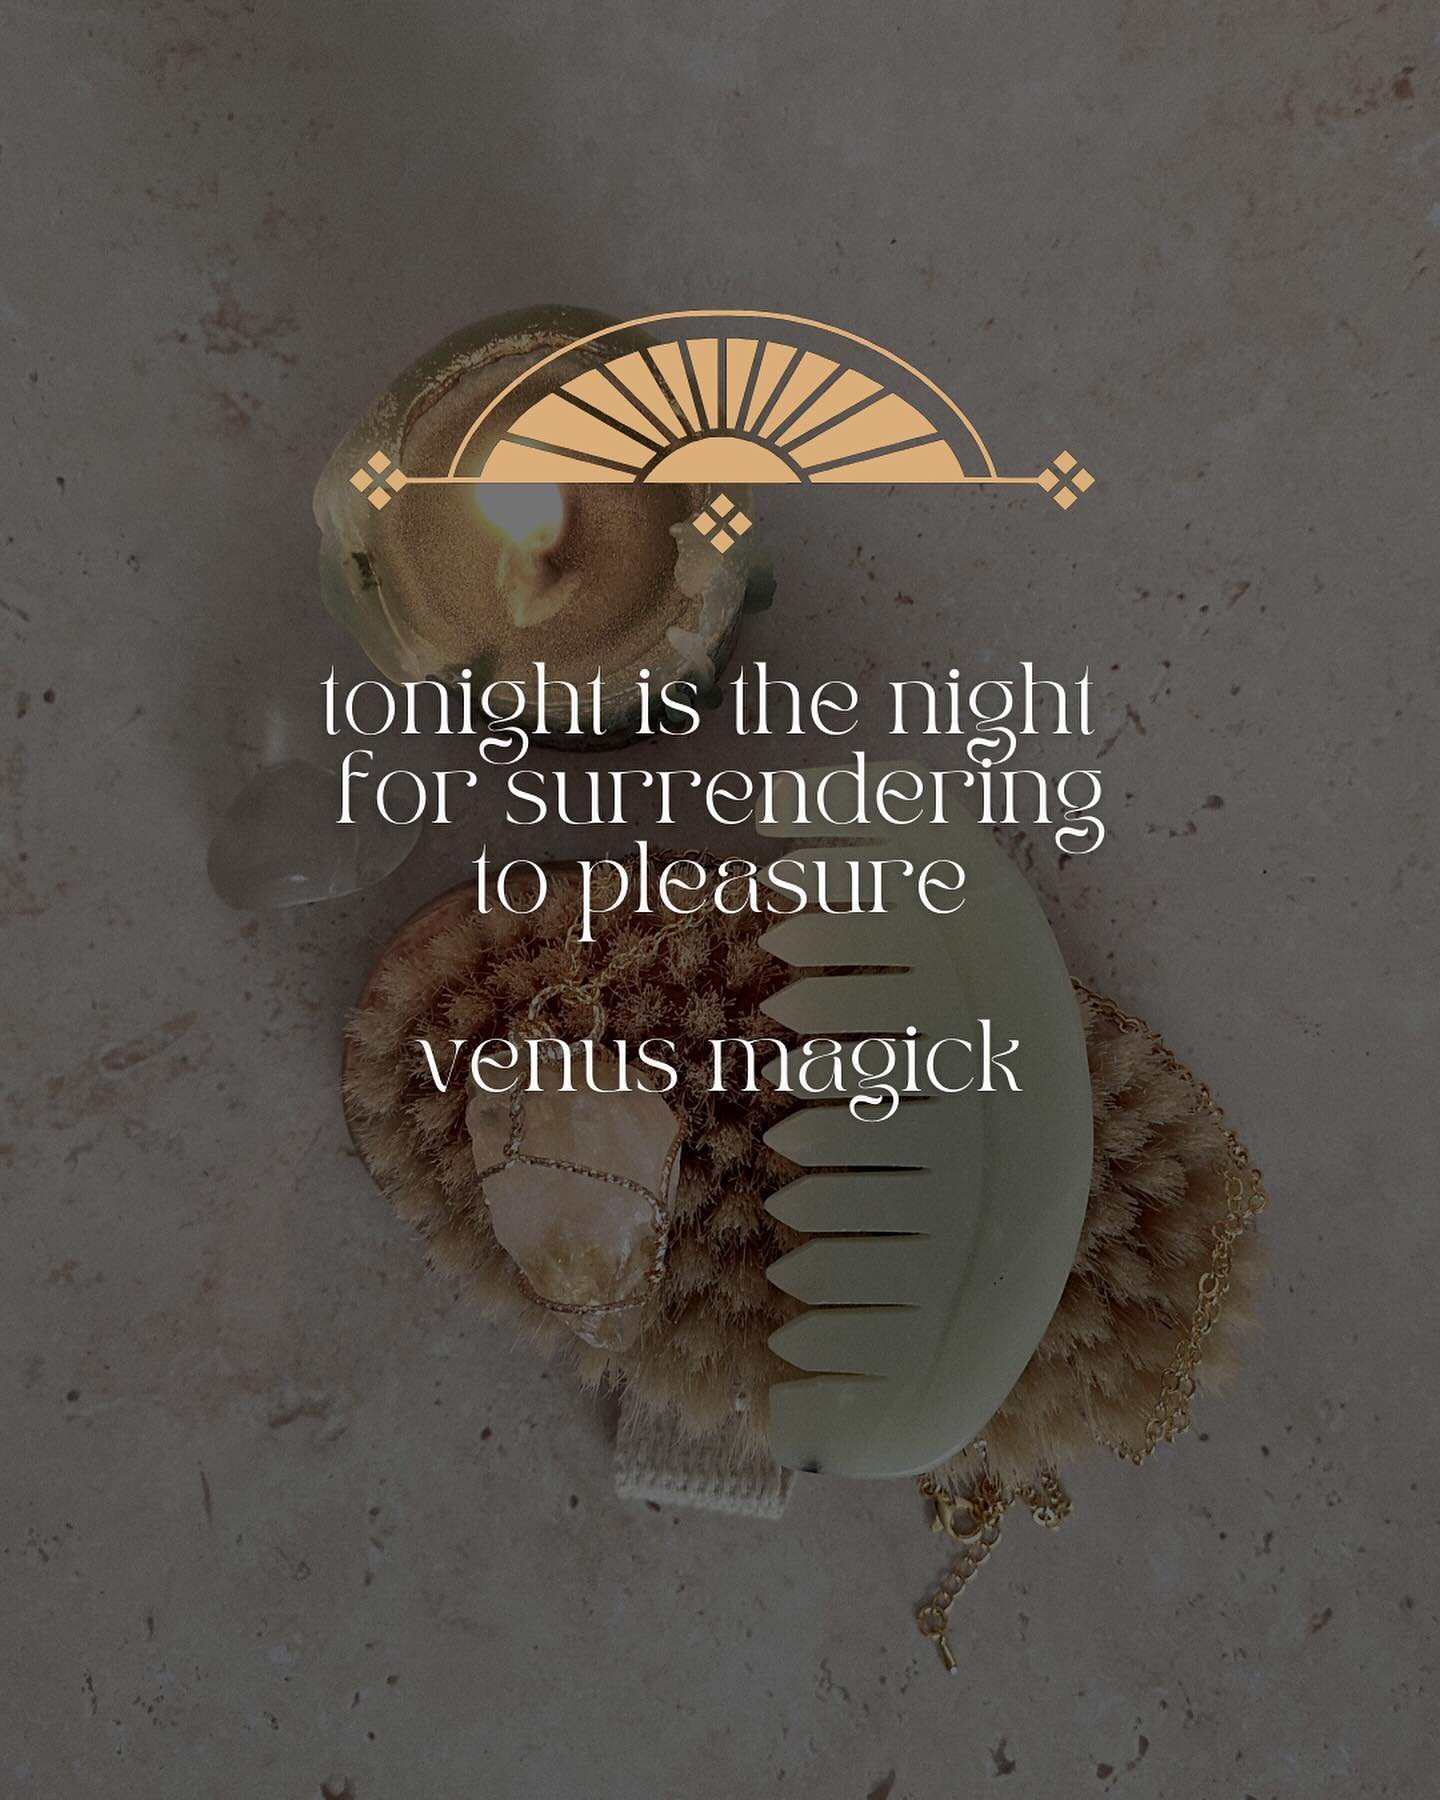 🫦Venus Nights 💖

This is your friendly reminder to treat yourself to pleasure now! 

The next three Friday nights are ruled by the Goddess of Pleasure! 🌟

#venus #venusintaurus #taurusseason